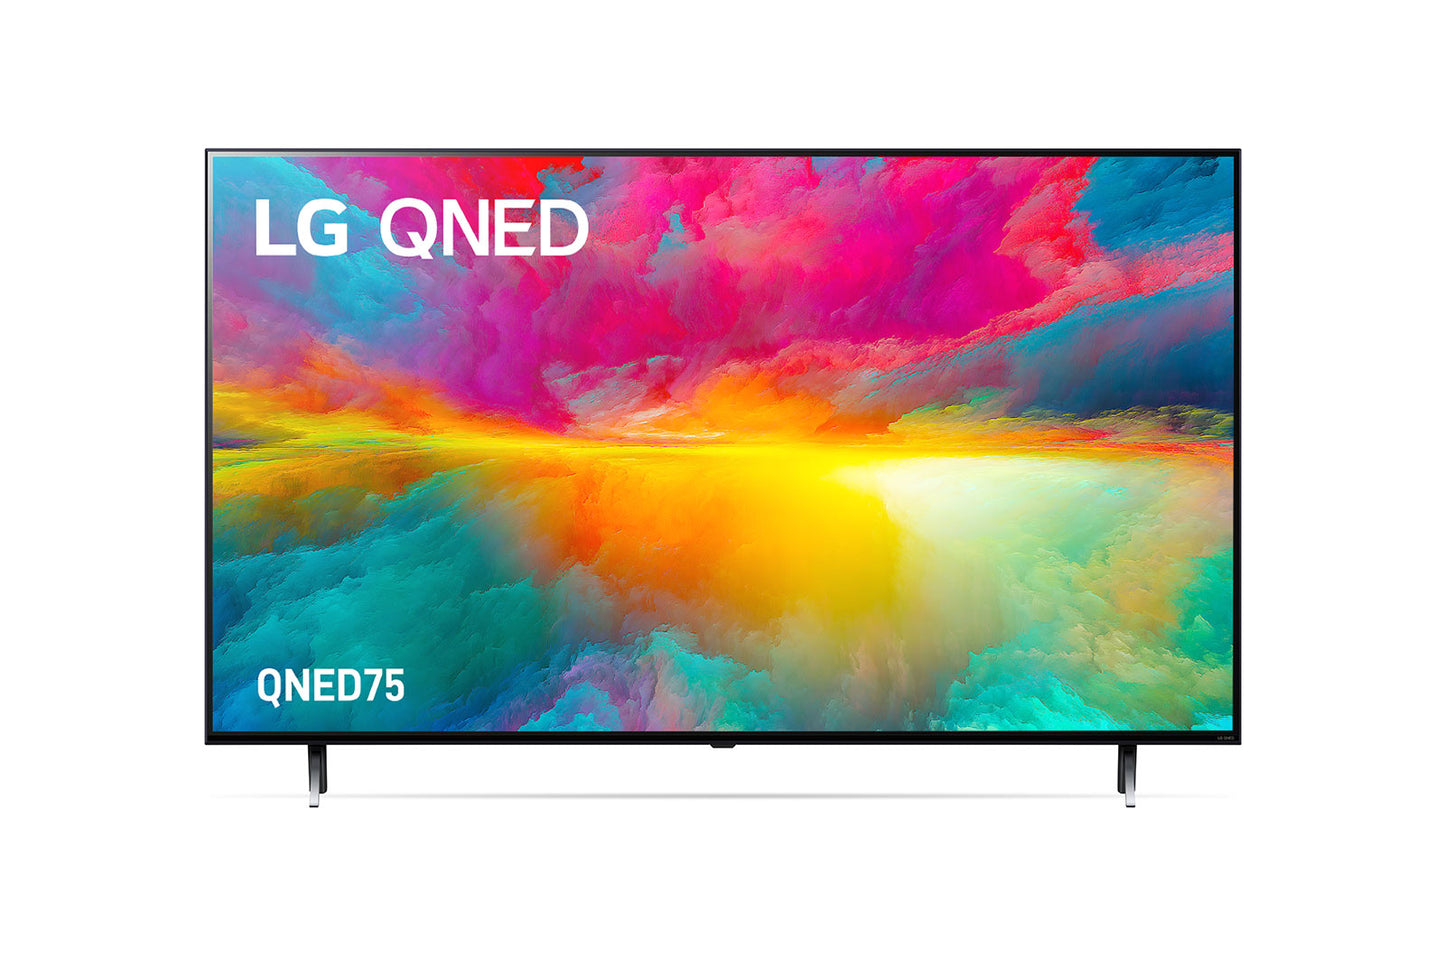 LG QNED75 75-inch 4K Smart TV with Quantum Dot Nanocell 75Qned75Sra